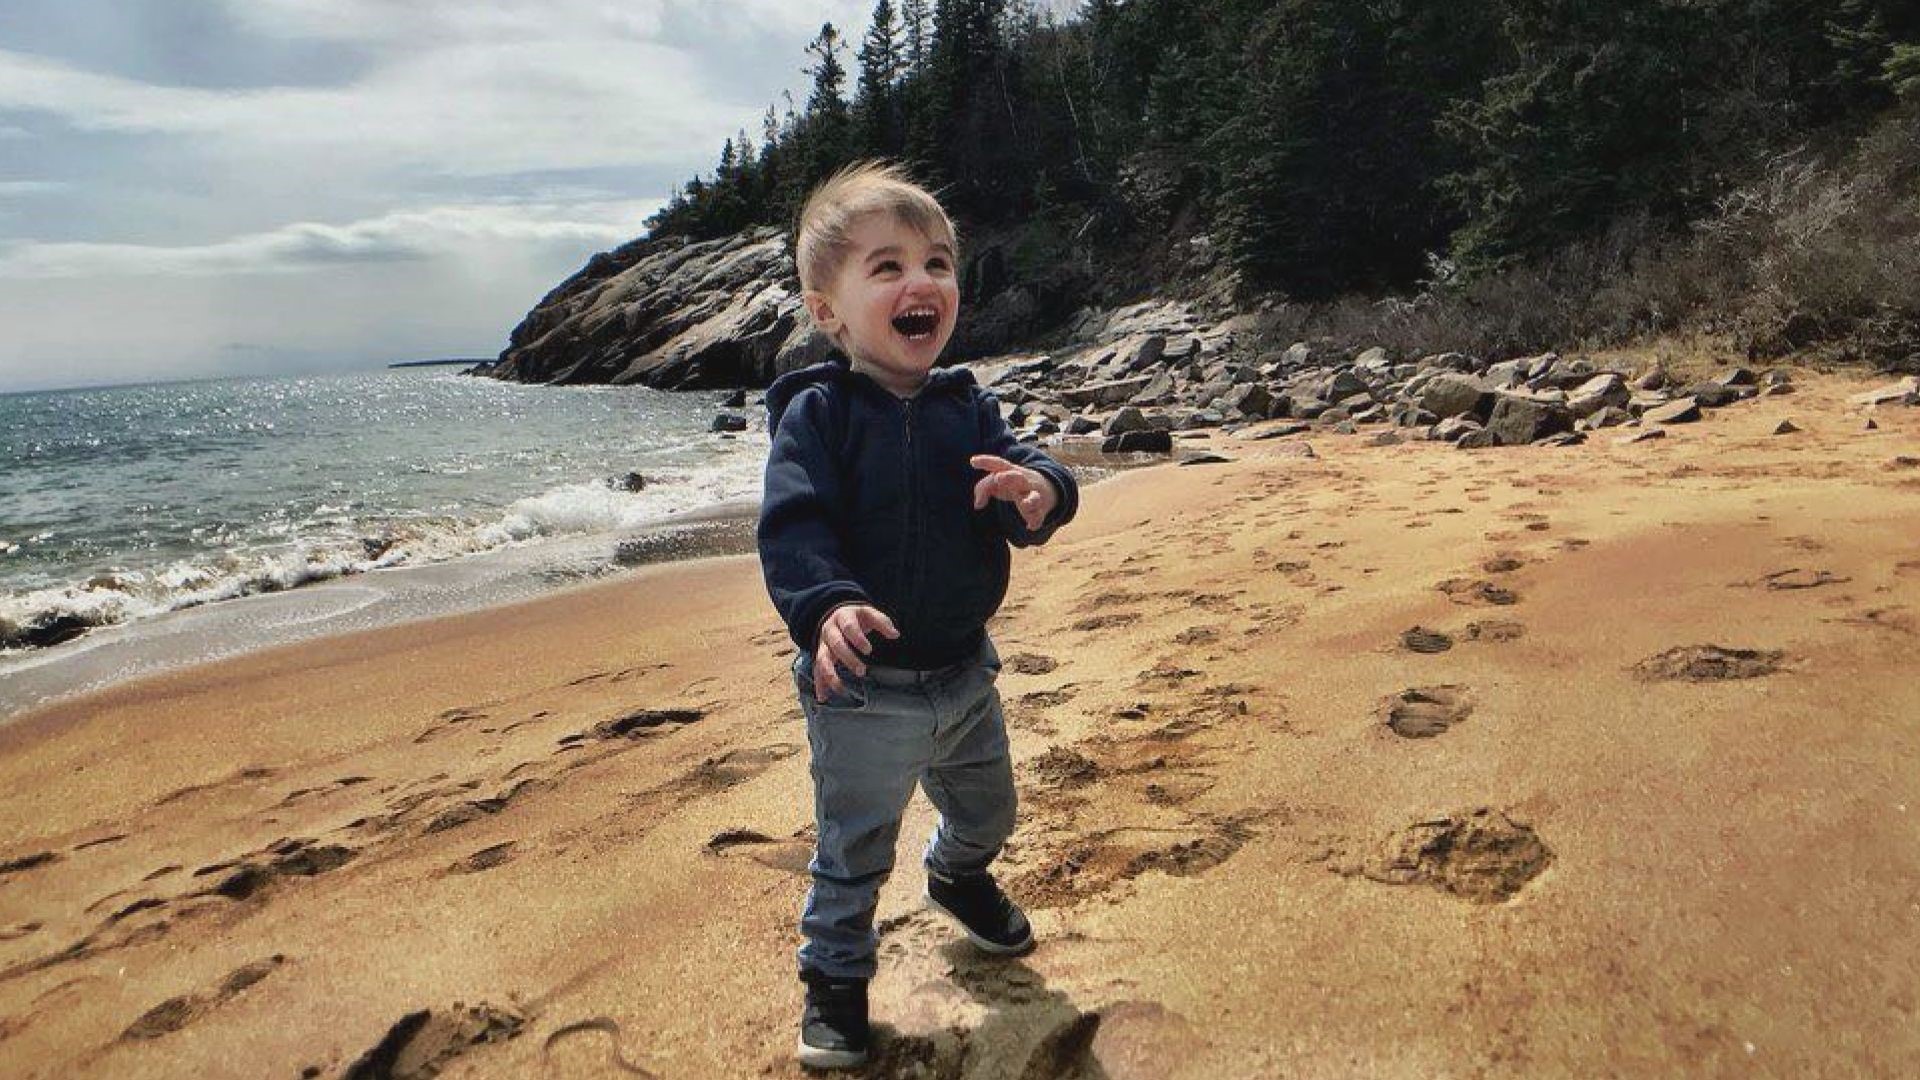 Nolan Desmond was diagnosed with Retinoblastoma, but his dad refused to let it stop him from 'seeing' the beauty of Maine and New England.